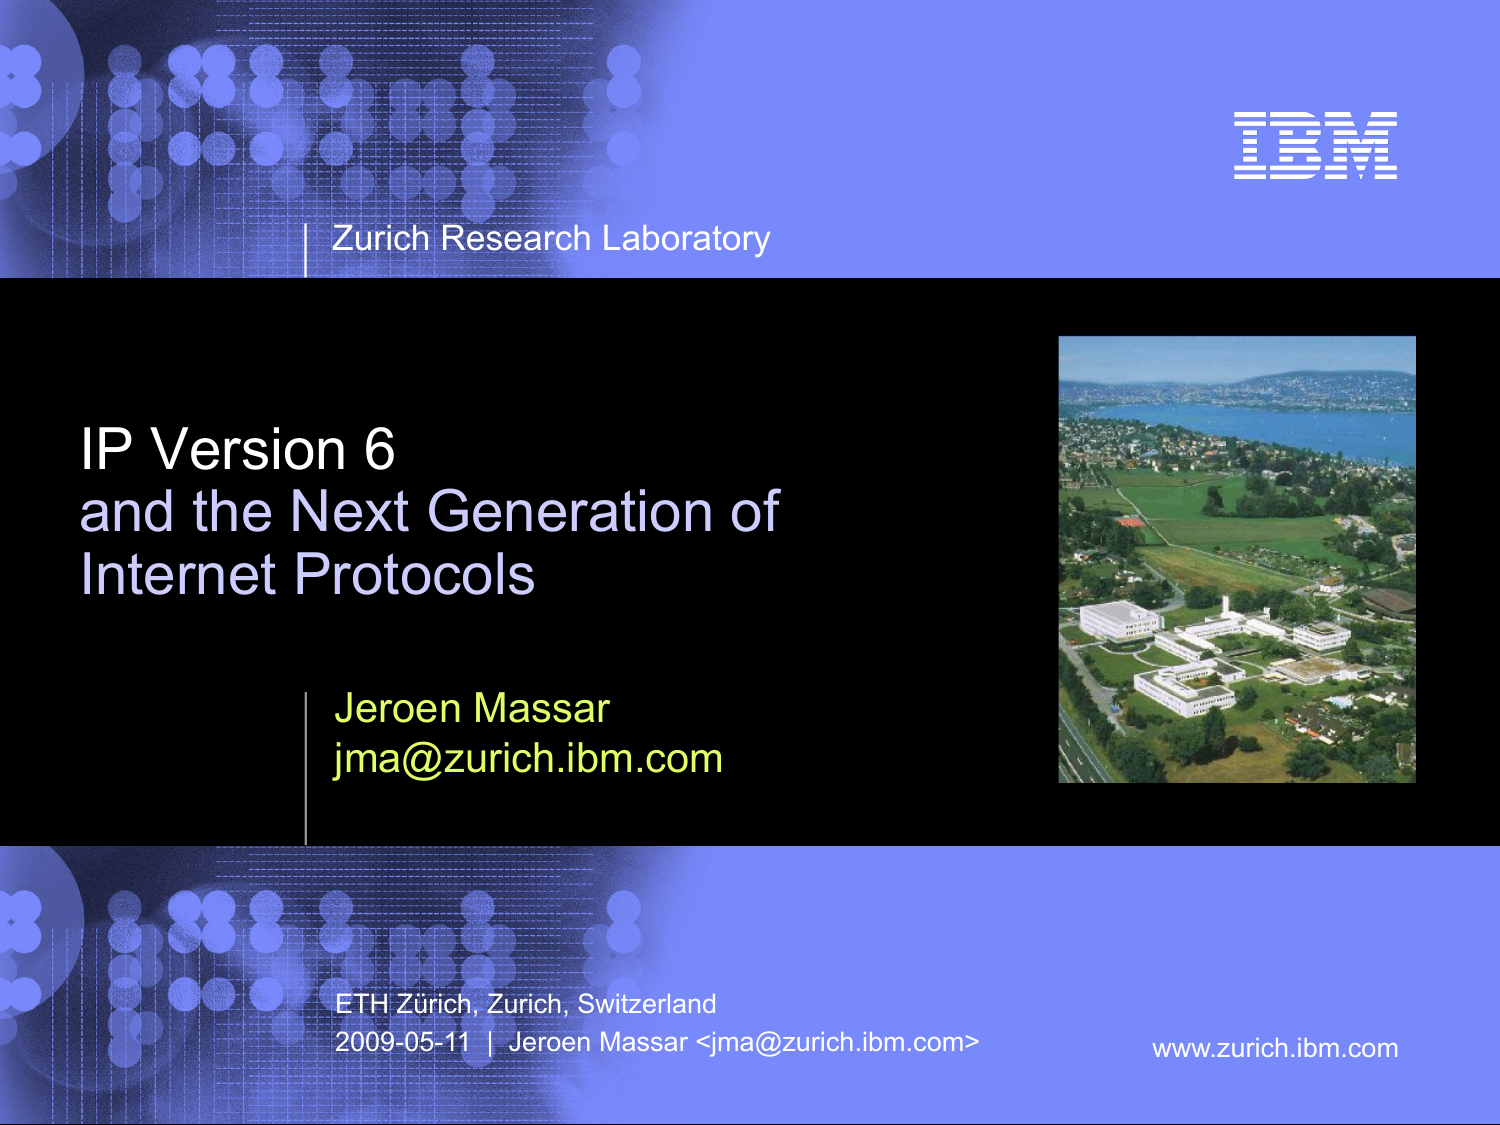 IP Version 6 and the Next Generation of the Internet Protocols First Slide Image